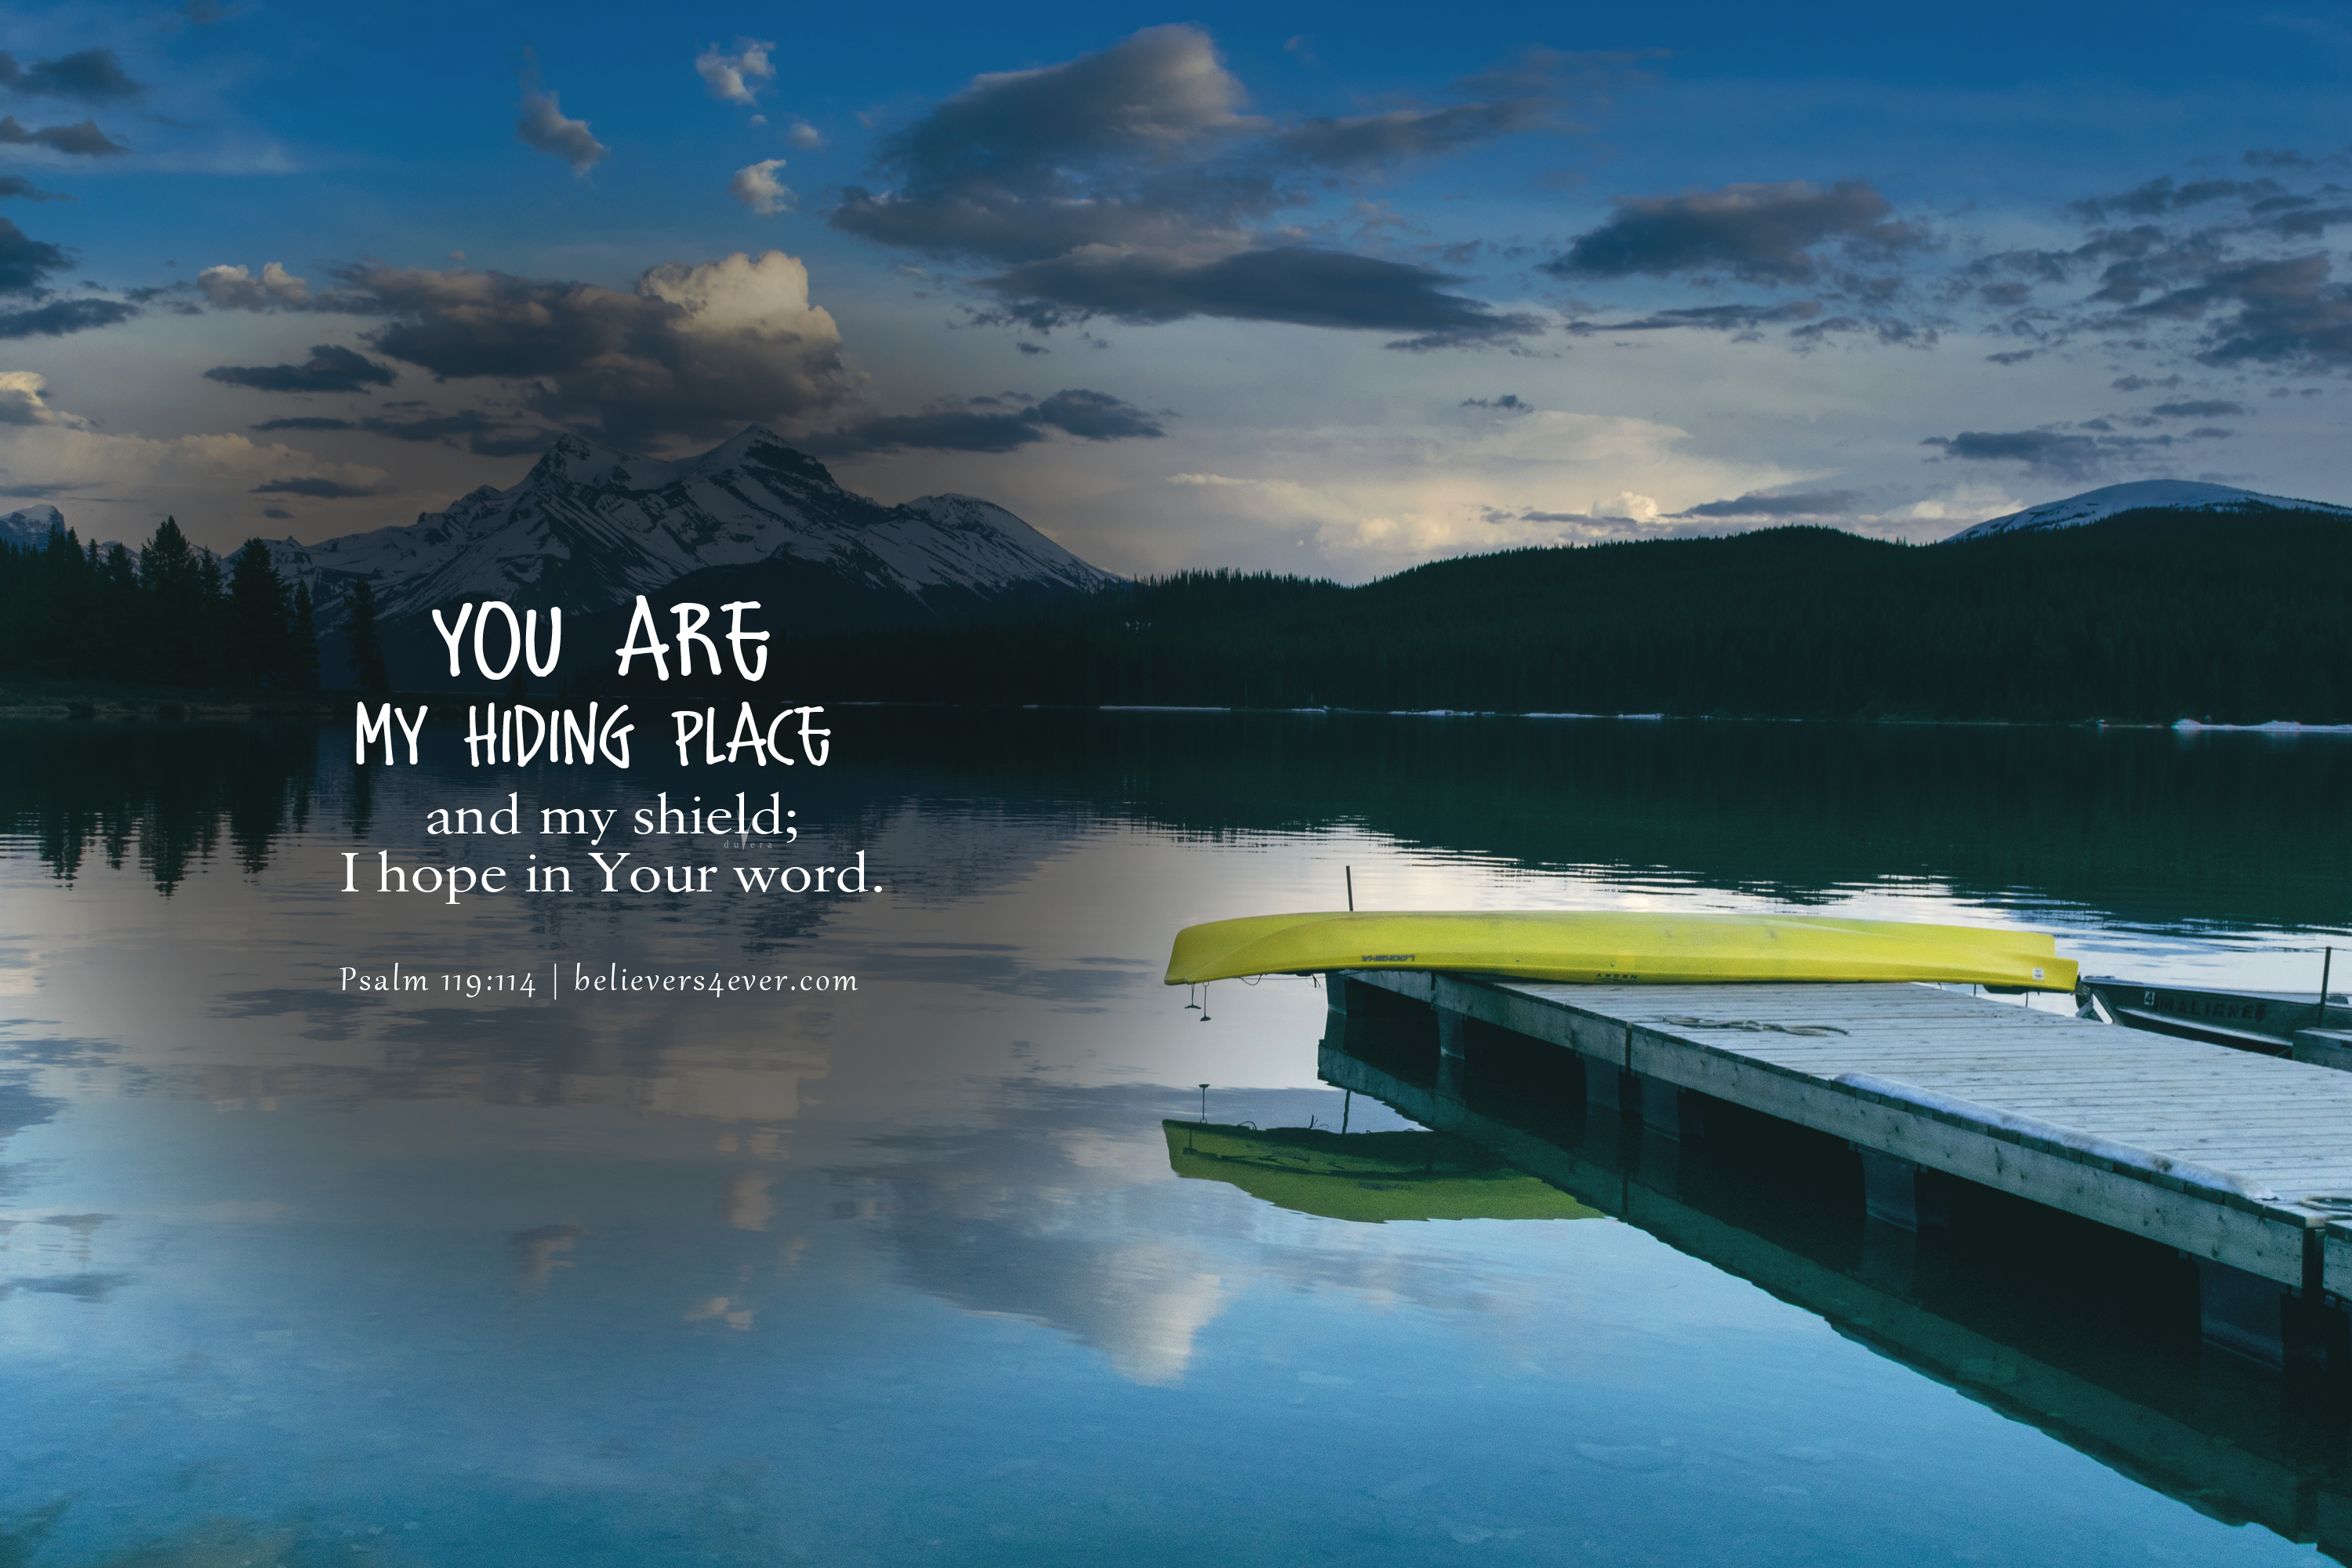 You are my hiding place. Bible verse wallpaper, Christian